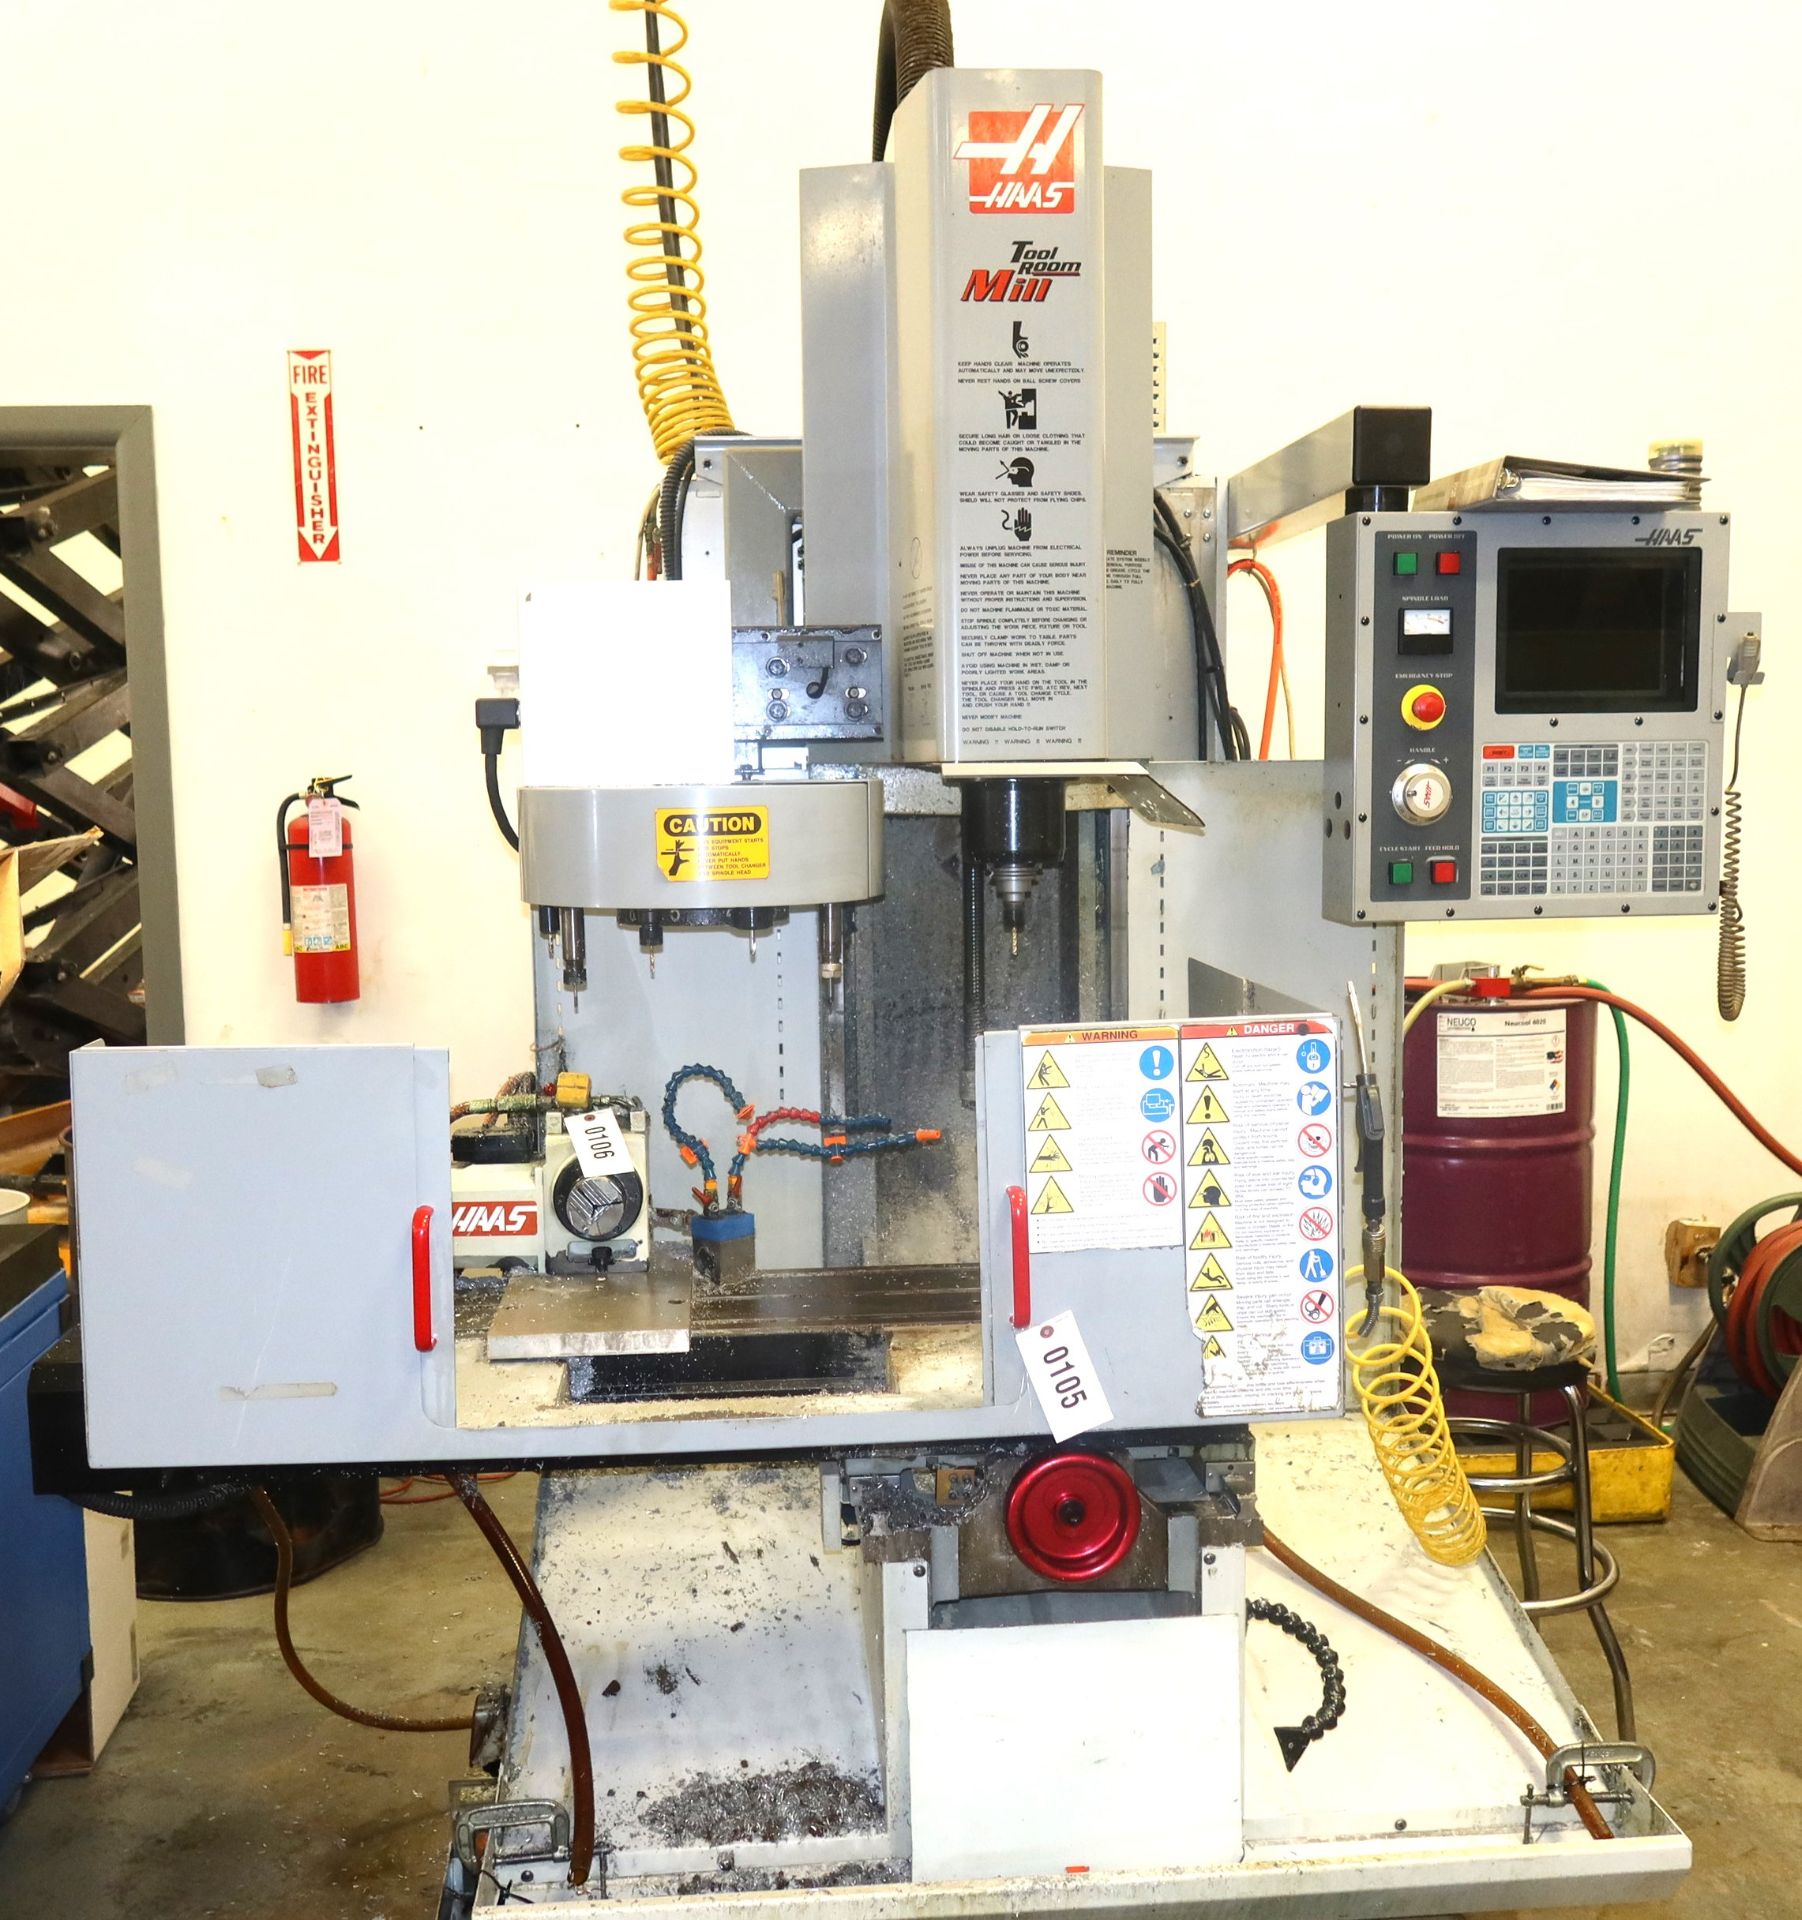 2001 Haas TM-1 CNC 4-axis Bed Type Vertical Milling Machine, SN 28257